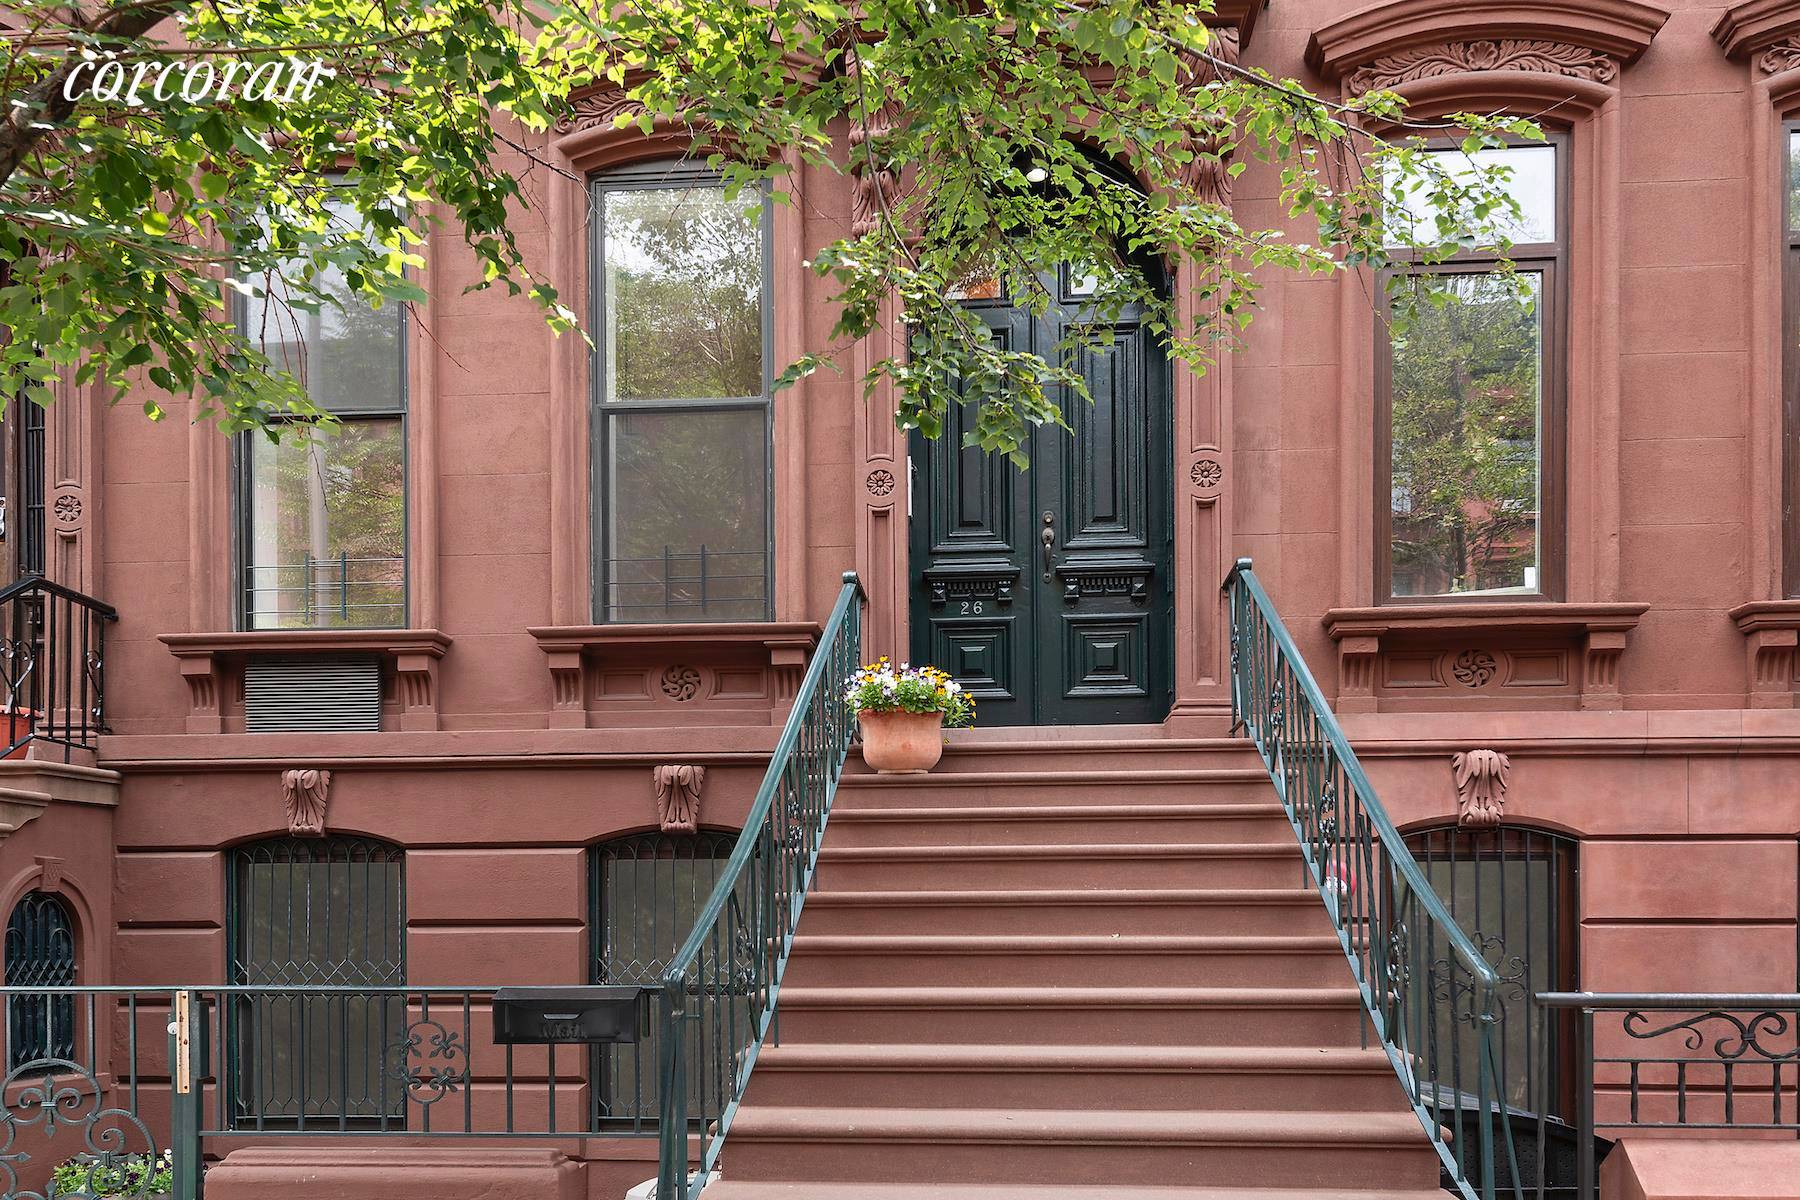 Like many of the historic townhouses near Fifth avenue, 26 E 126th has a grand sweeping stoop and classic facade.